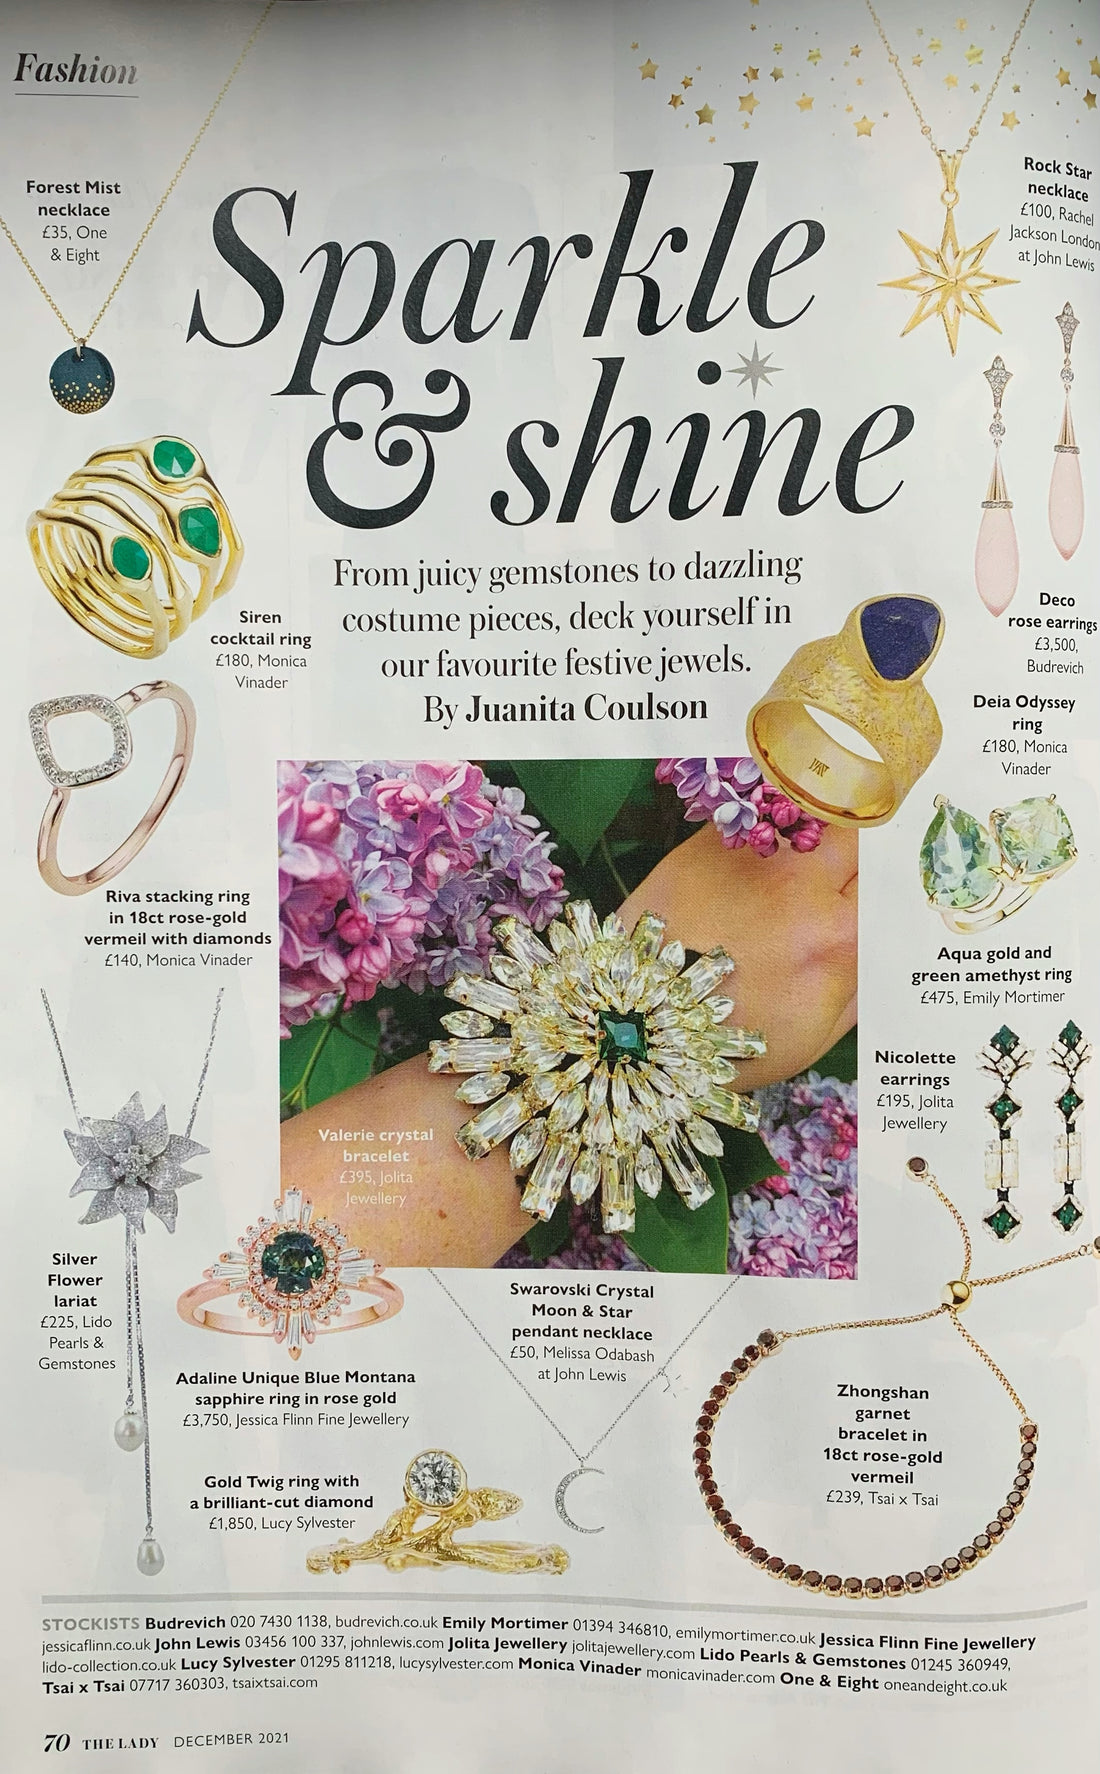 Jolita Jewellery feature in the December issue of the Lady magazine